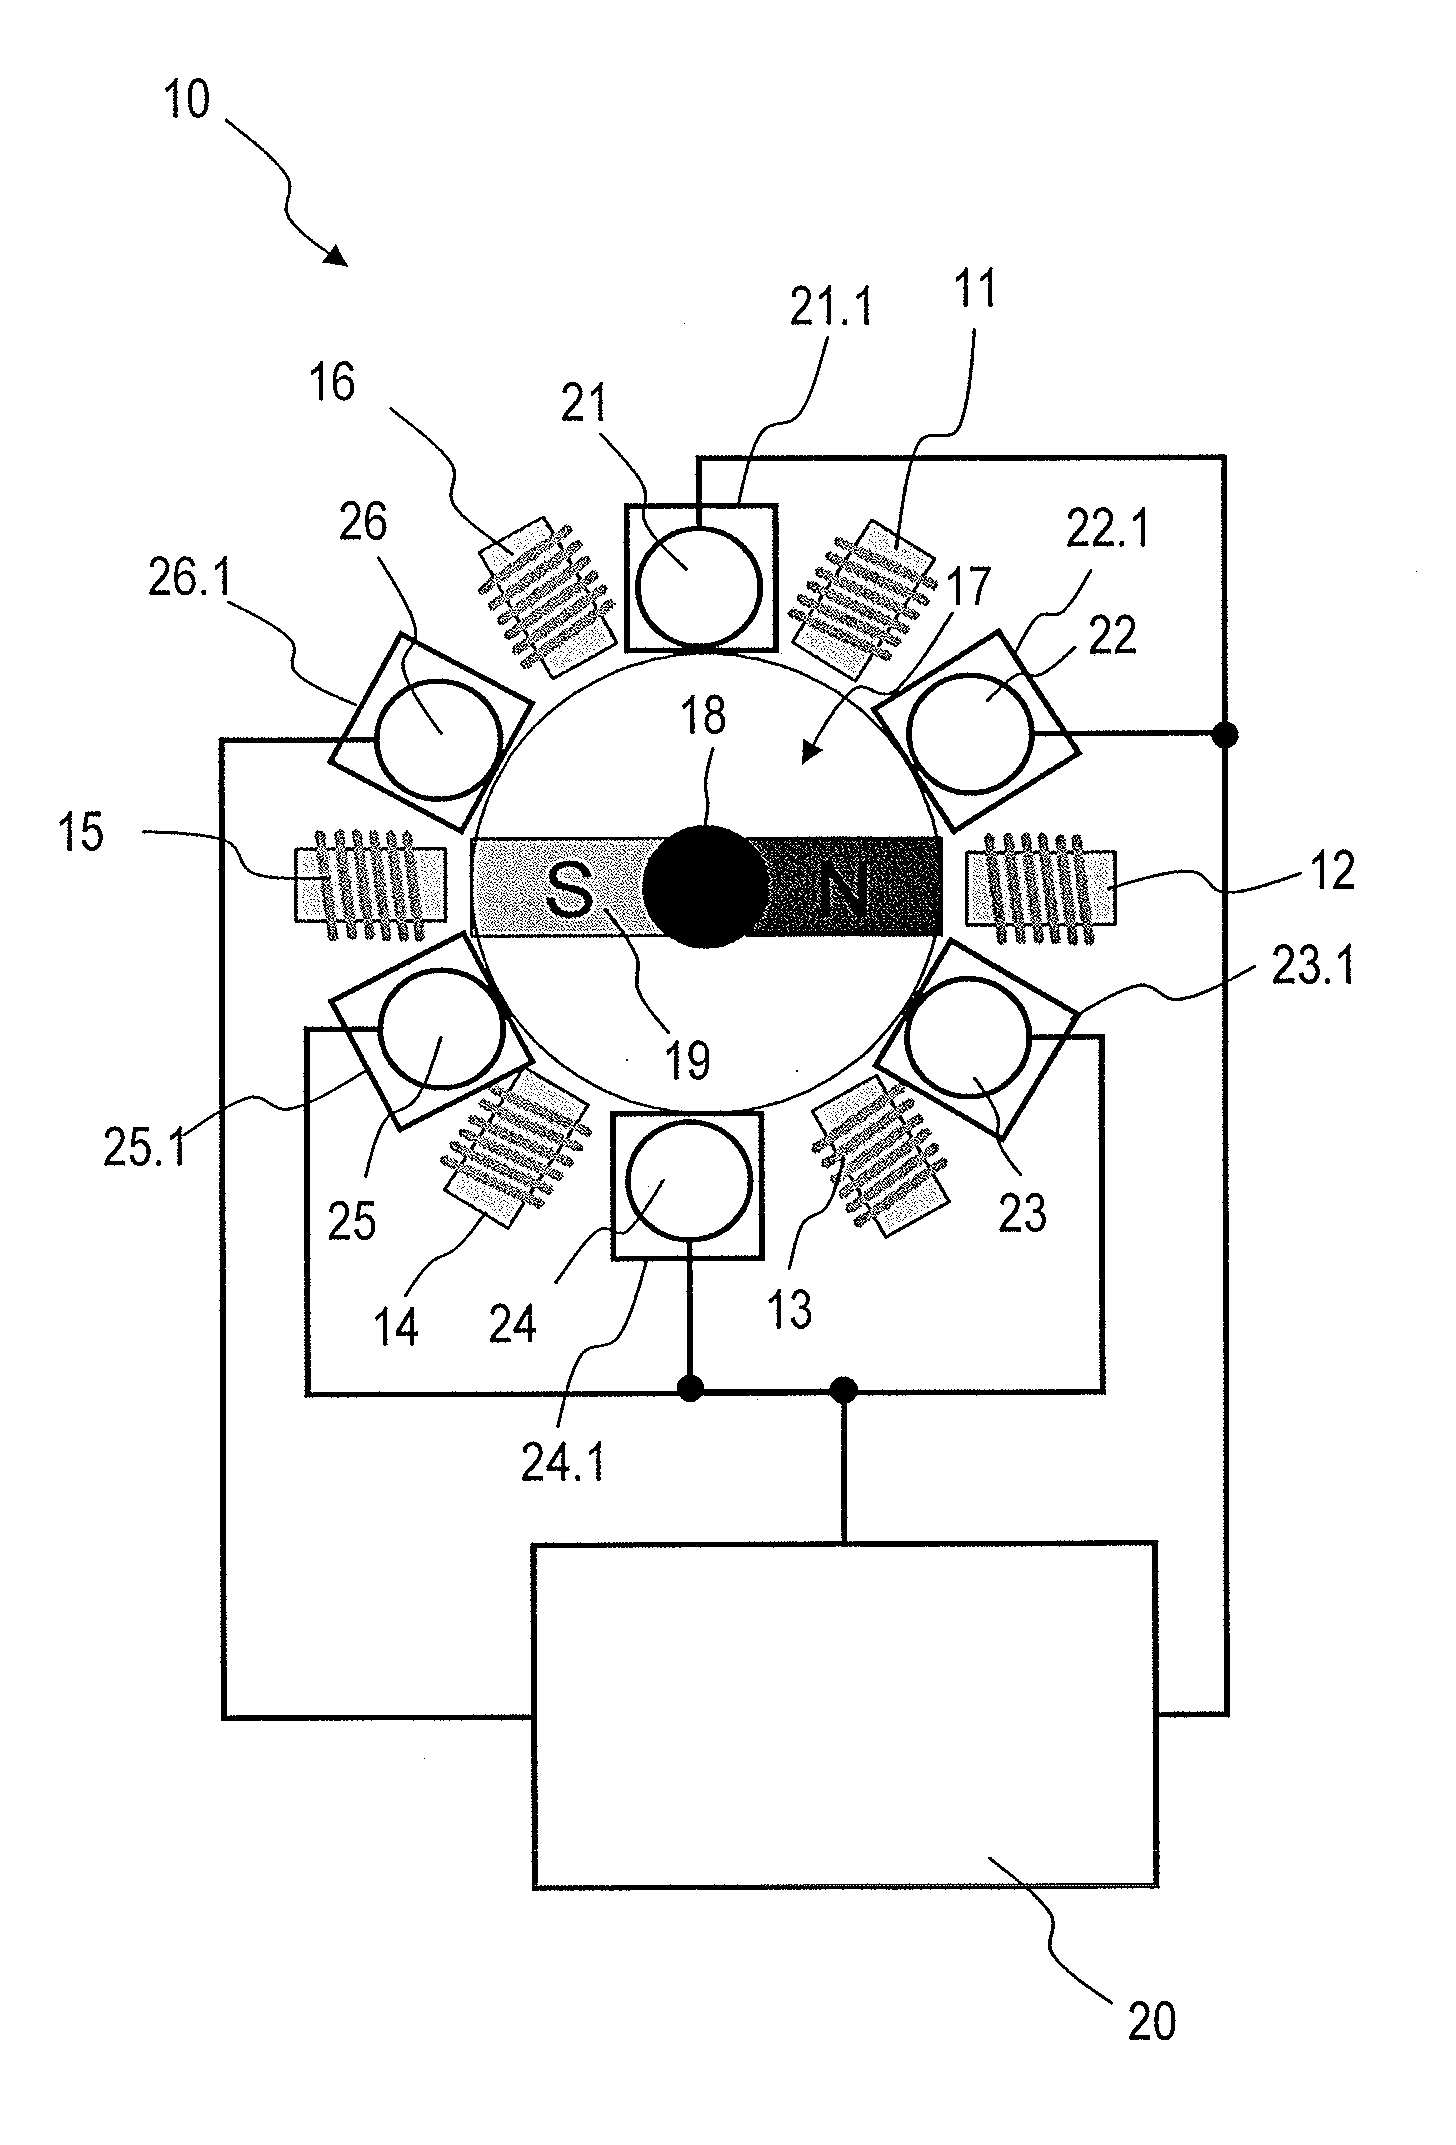 Drive authorization system for an electric drive